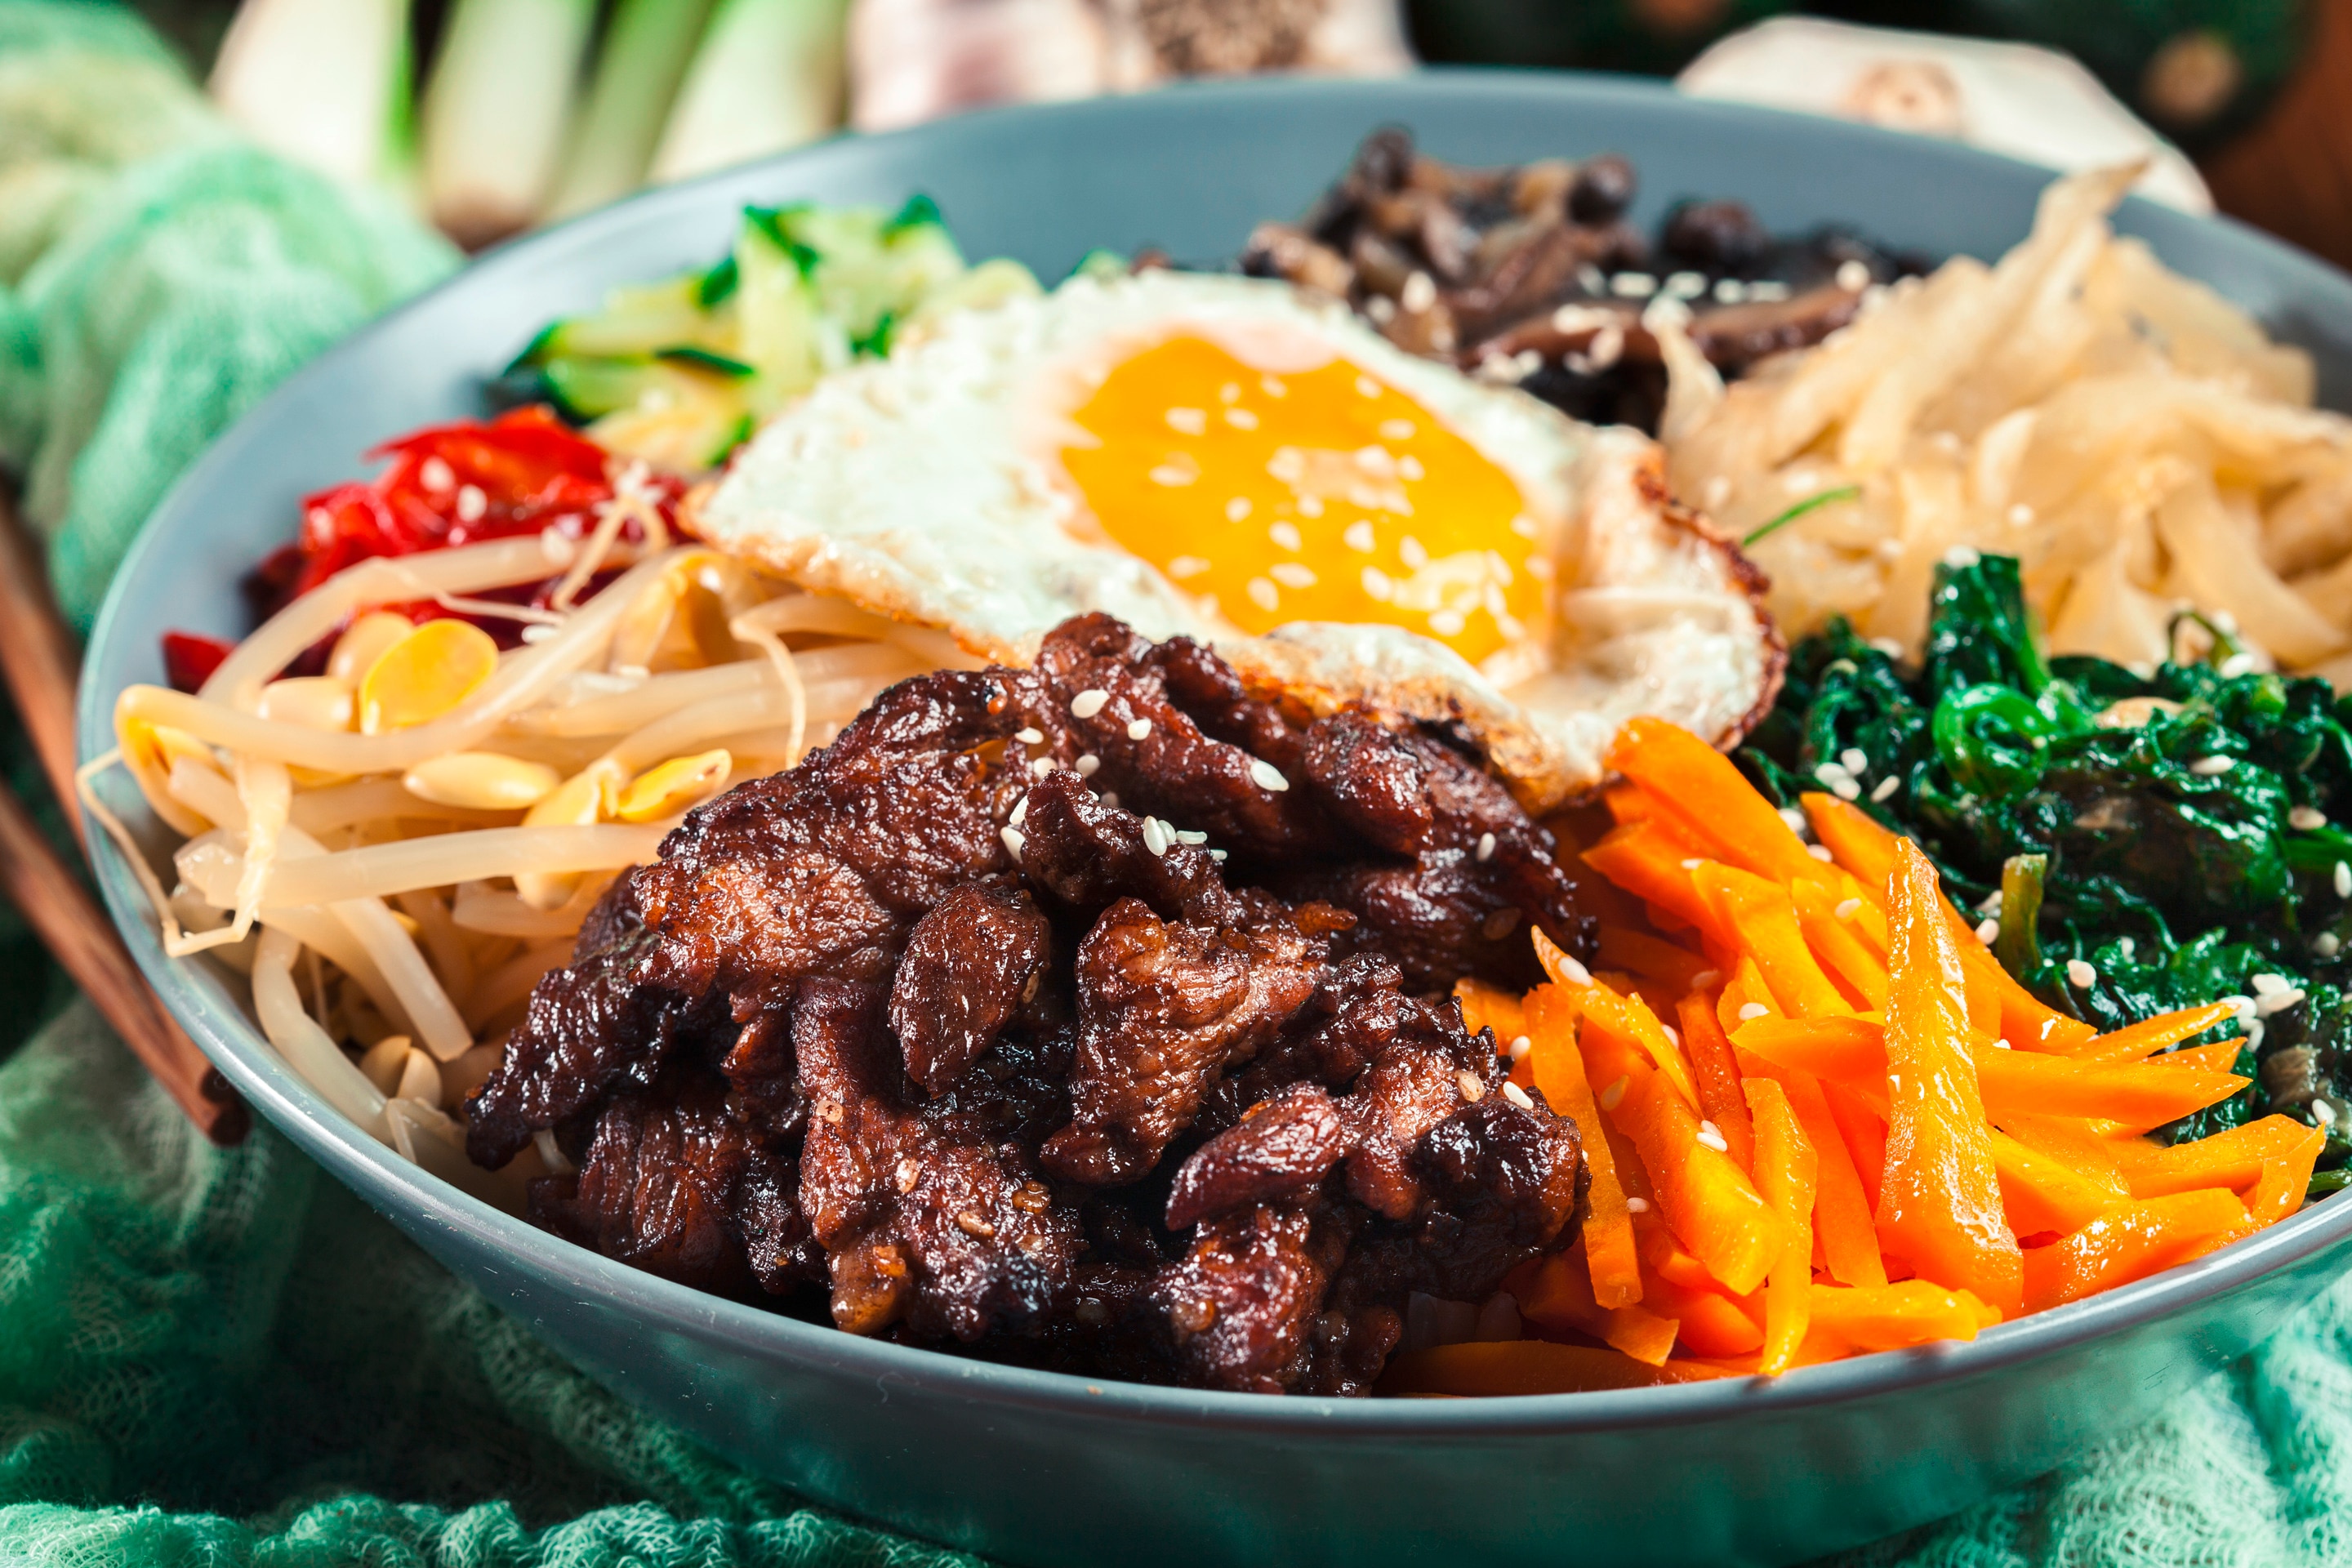 Bibimbap with slices of beef, carrot, kangkong, togue, cucumber, mushroom, and chili in a bowl of rice with a sunny-side up egg on top